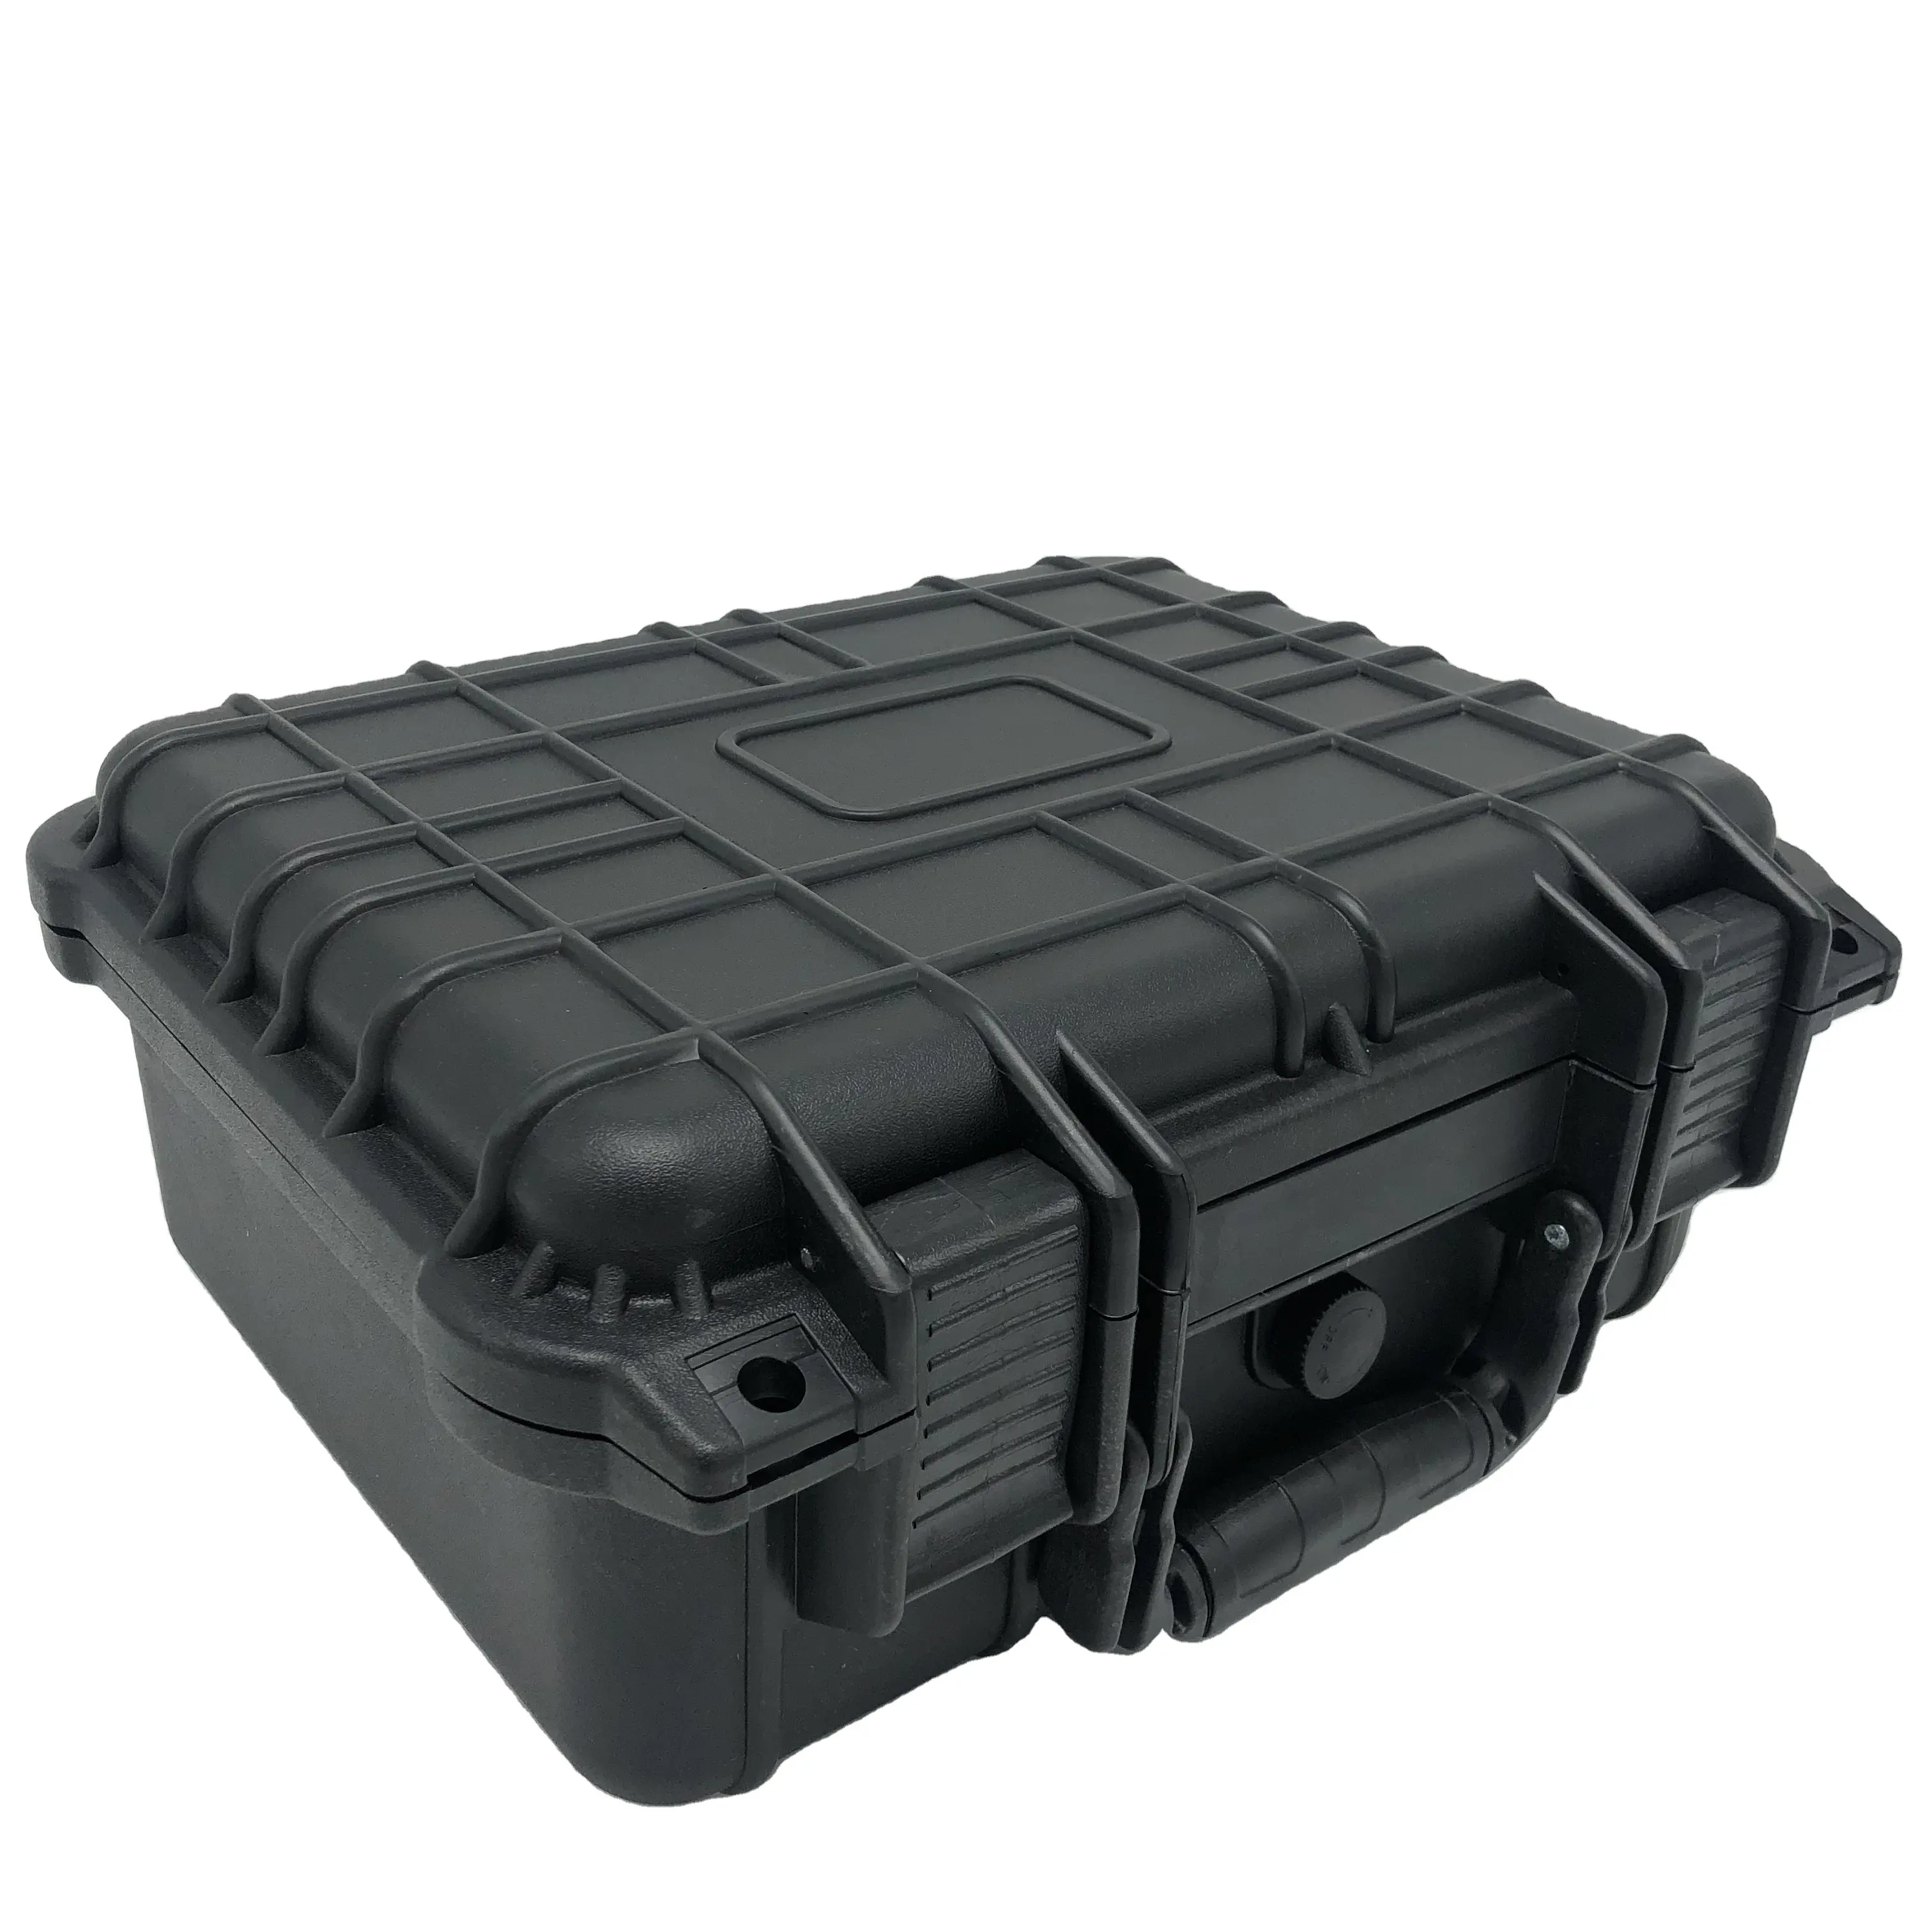 DPC036 plastic anti-corrosion safety protective waterproof Multi-functional equipment case with foam insert